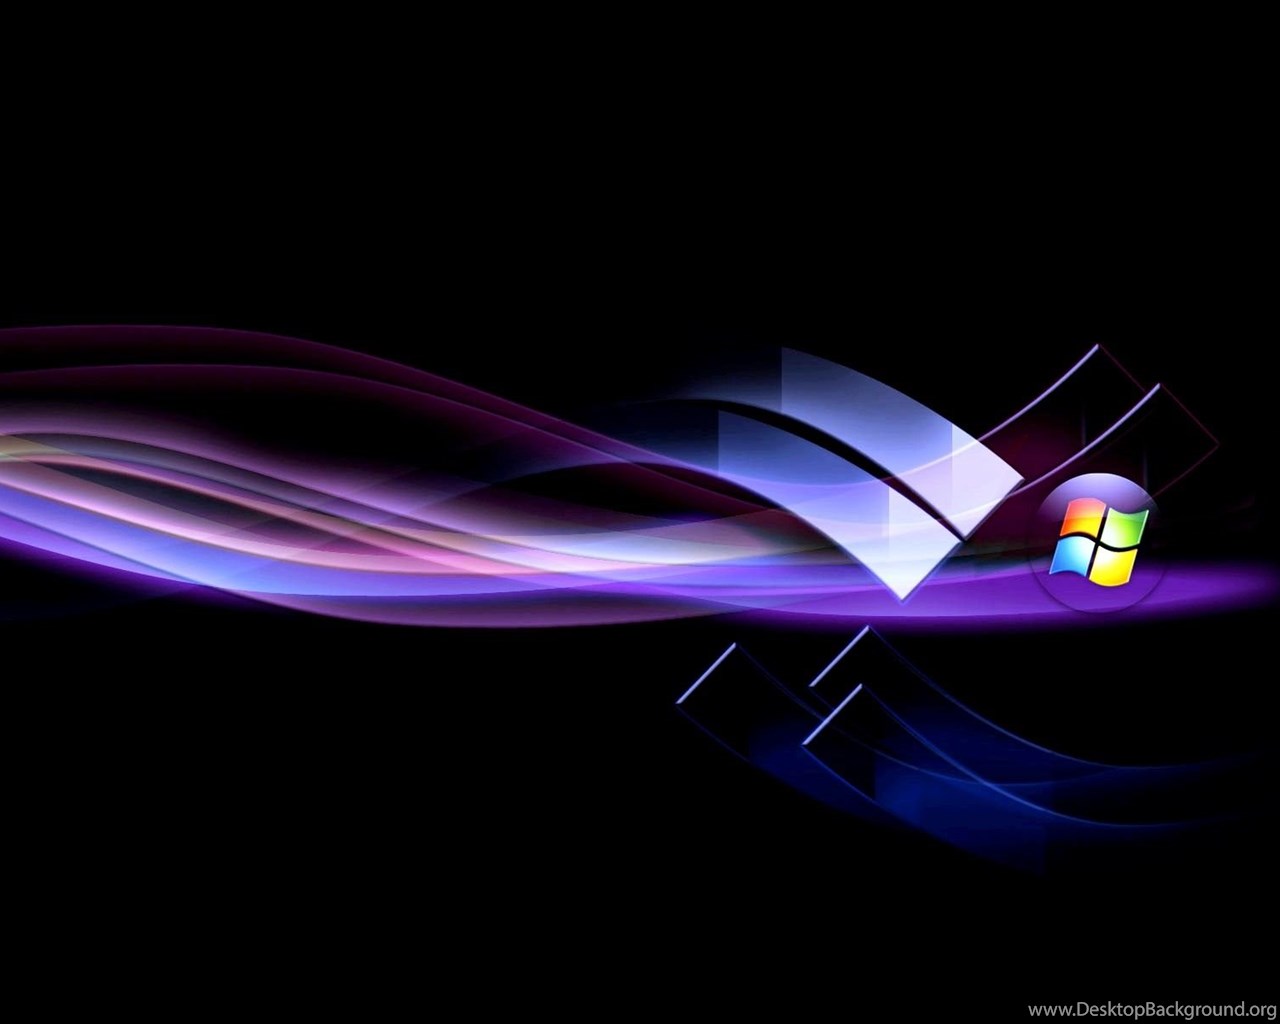 Animated Desktop Wallpapers Windows 7 Free Cool Wallpapers ...